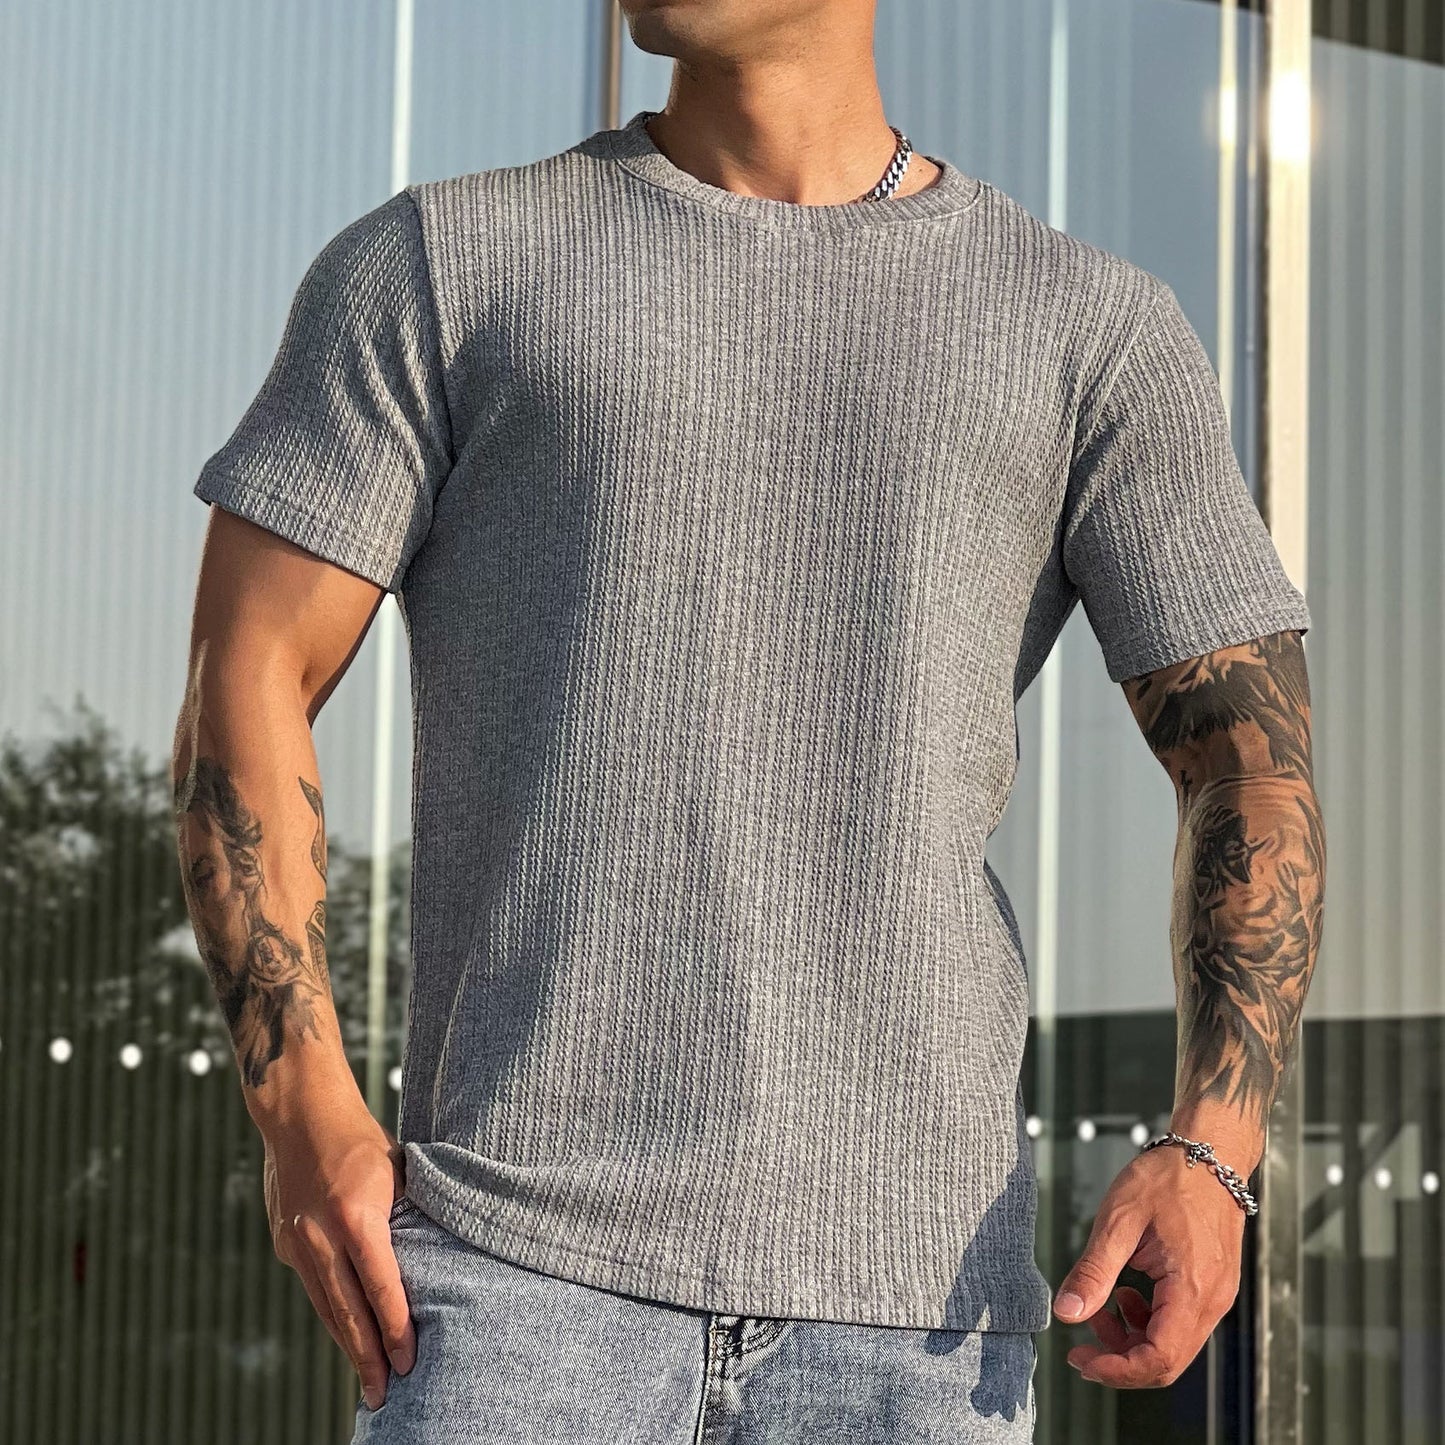 Sleek Sports & Leisure Tee: Slim Fit, Breathable Stretch for Every Season